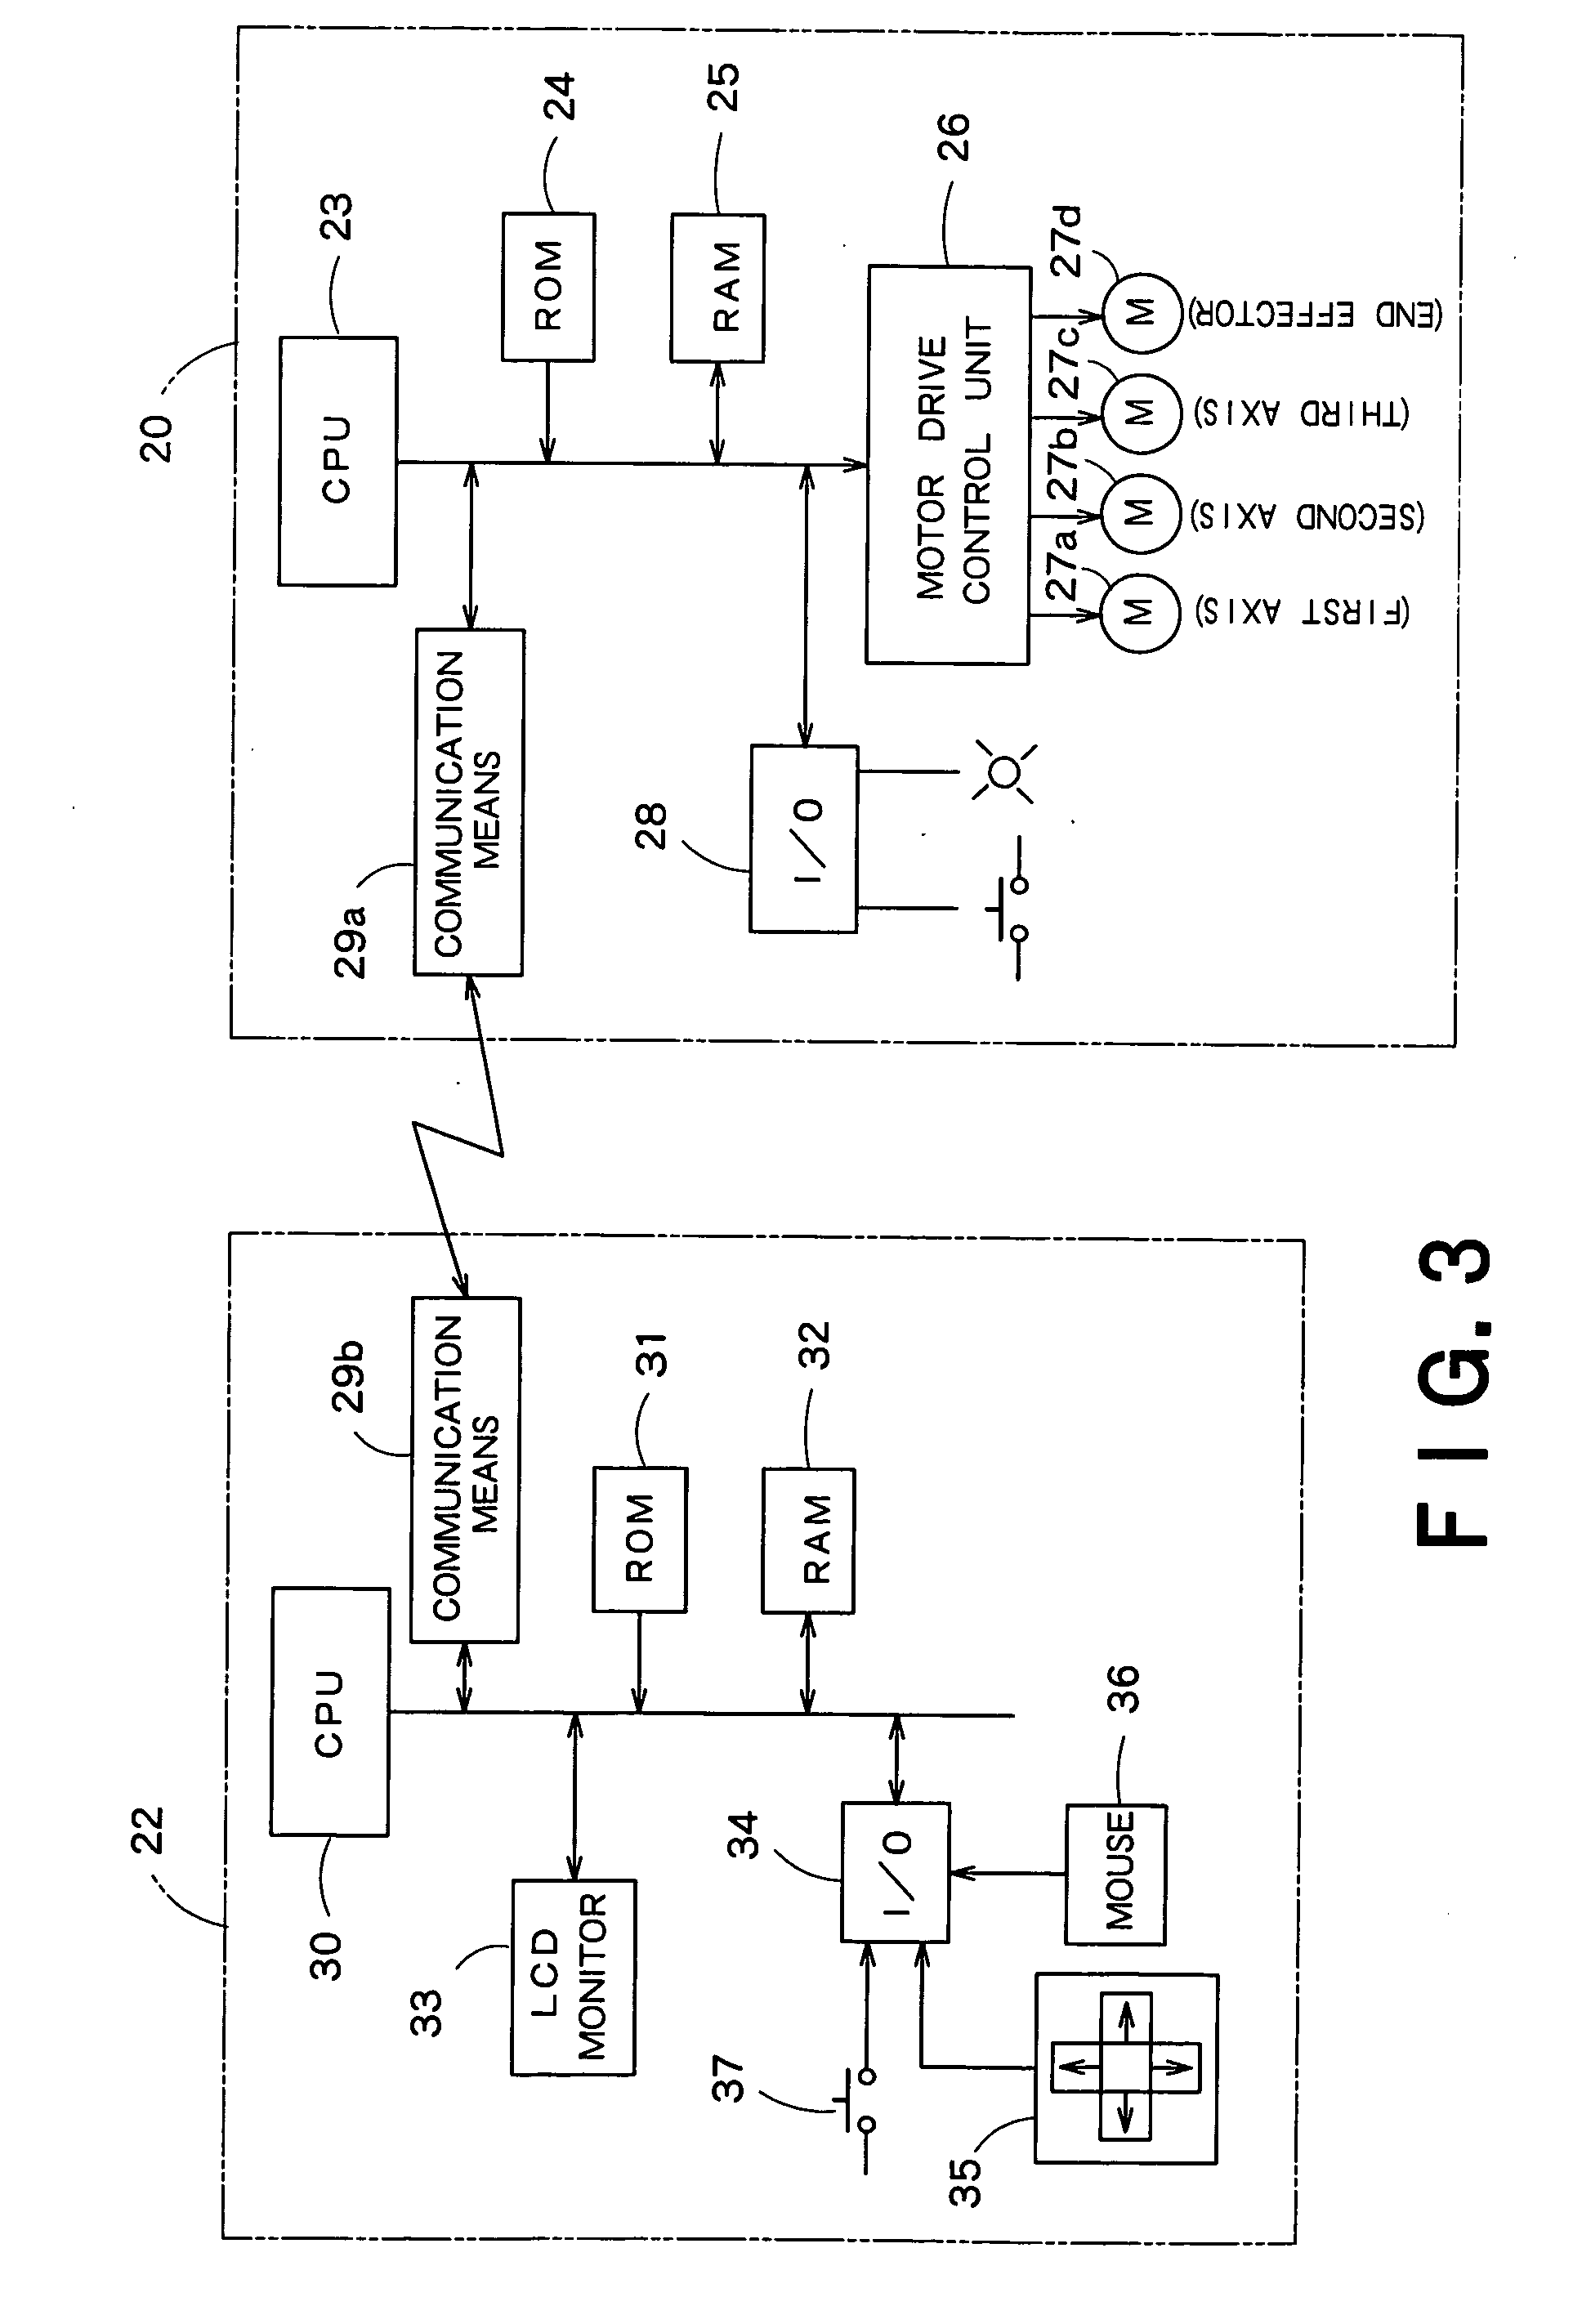 Travel time display device and method for industrial robot